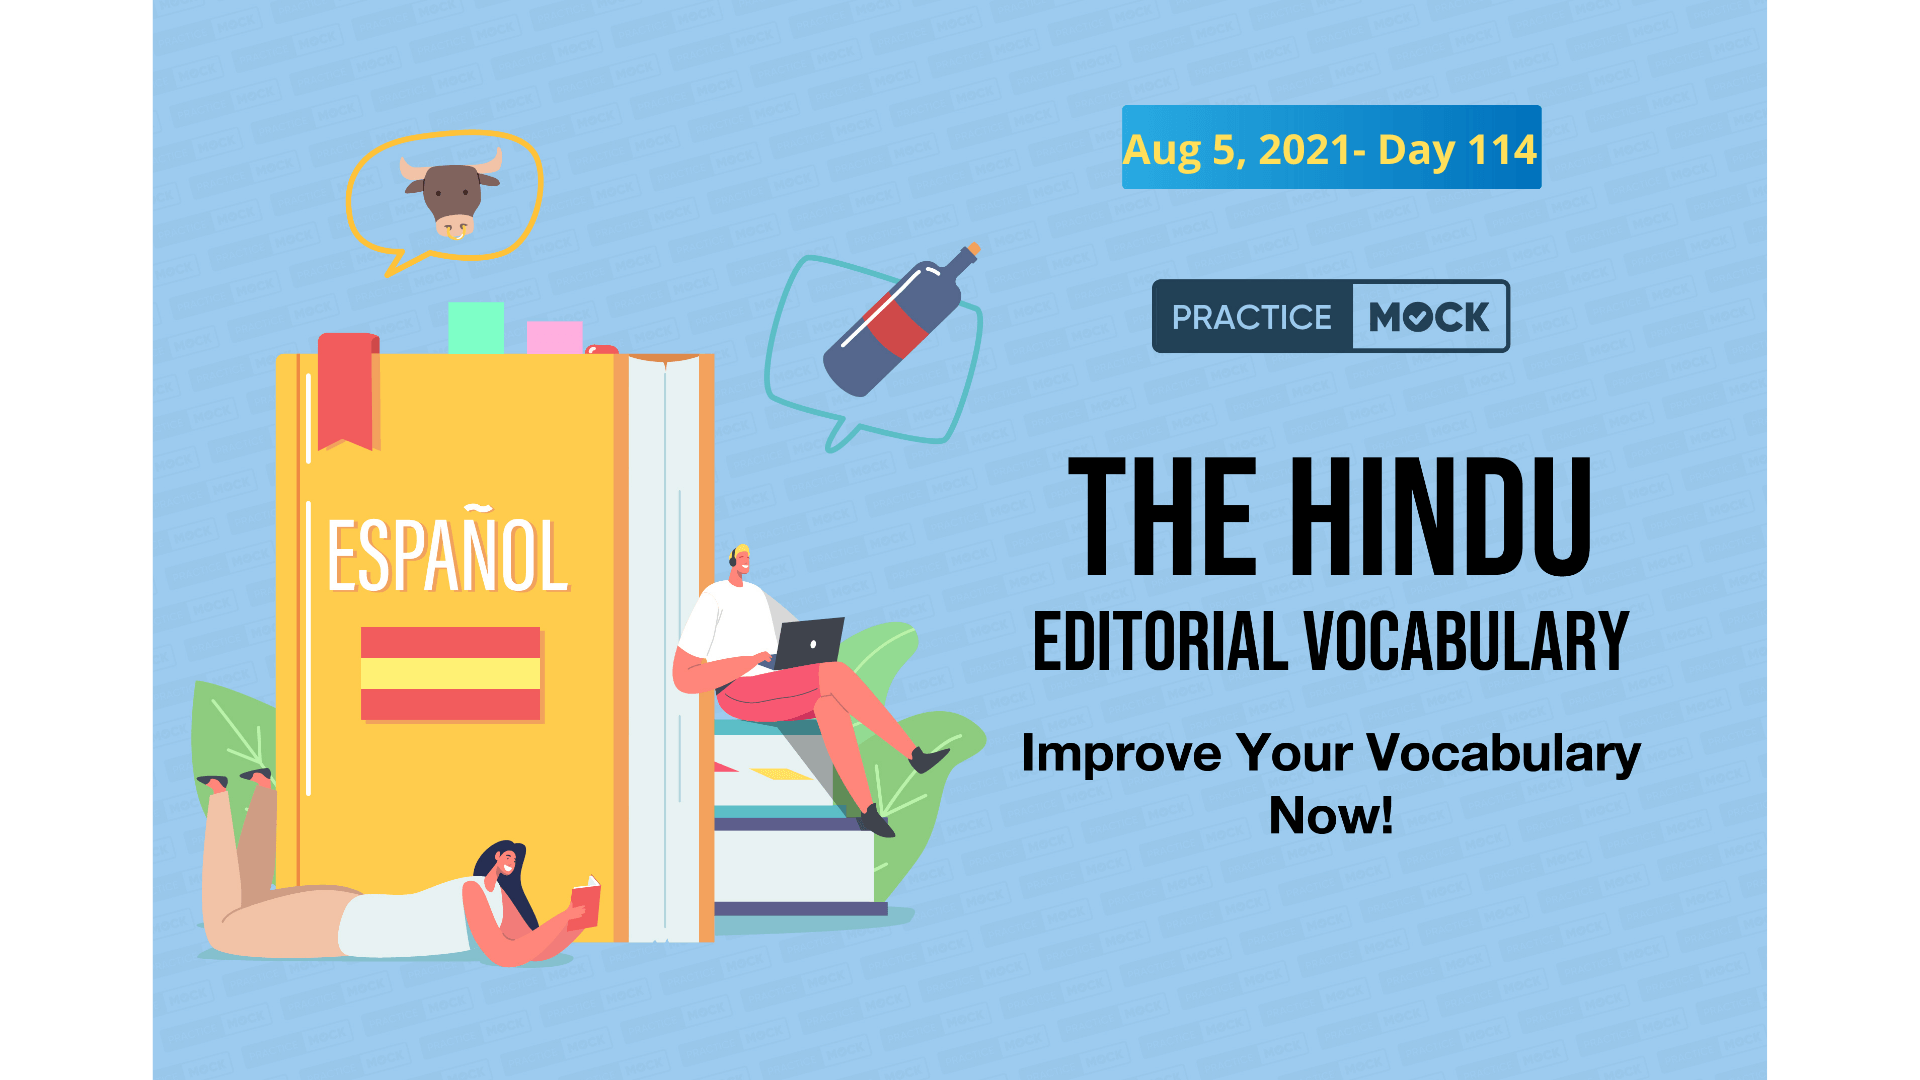 The Hindu Editorial Vocabulary– Aug 5, 2021; Day 114